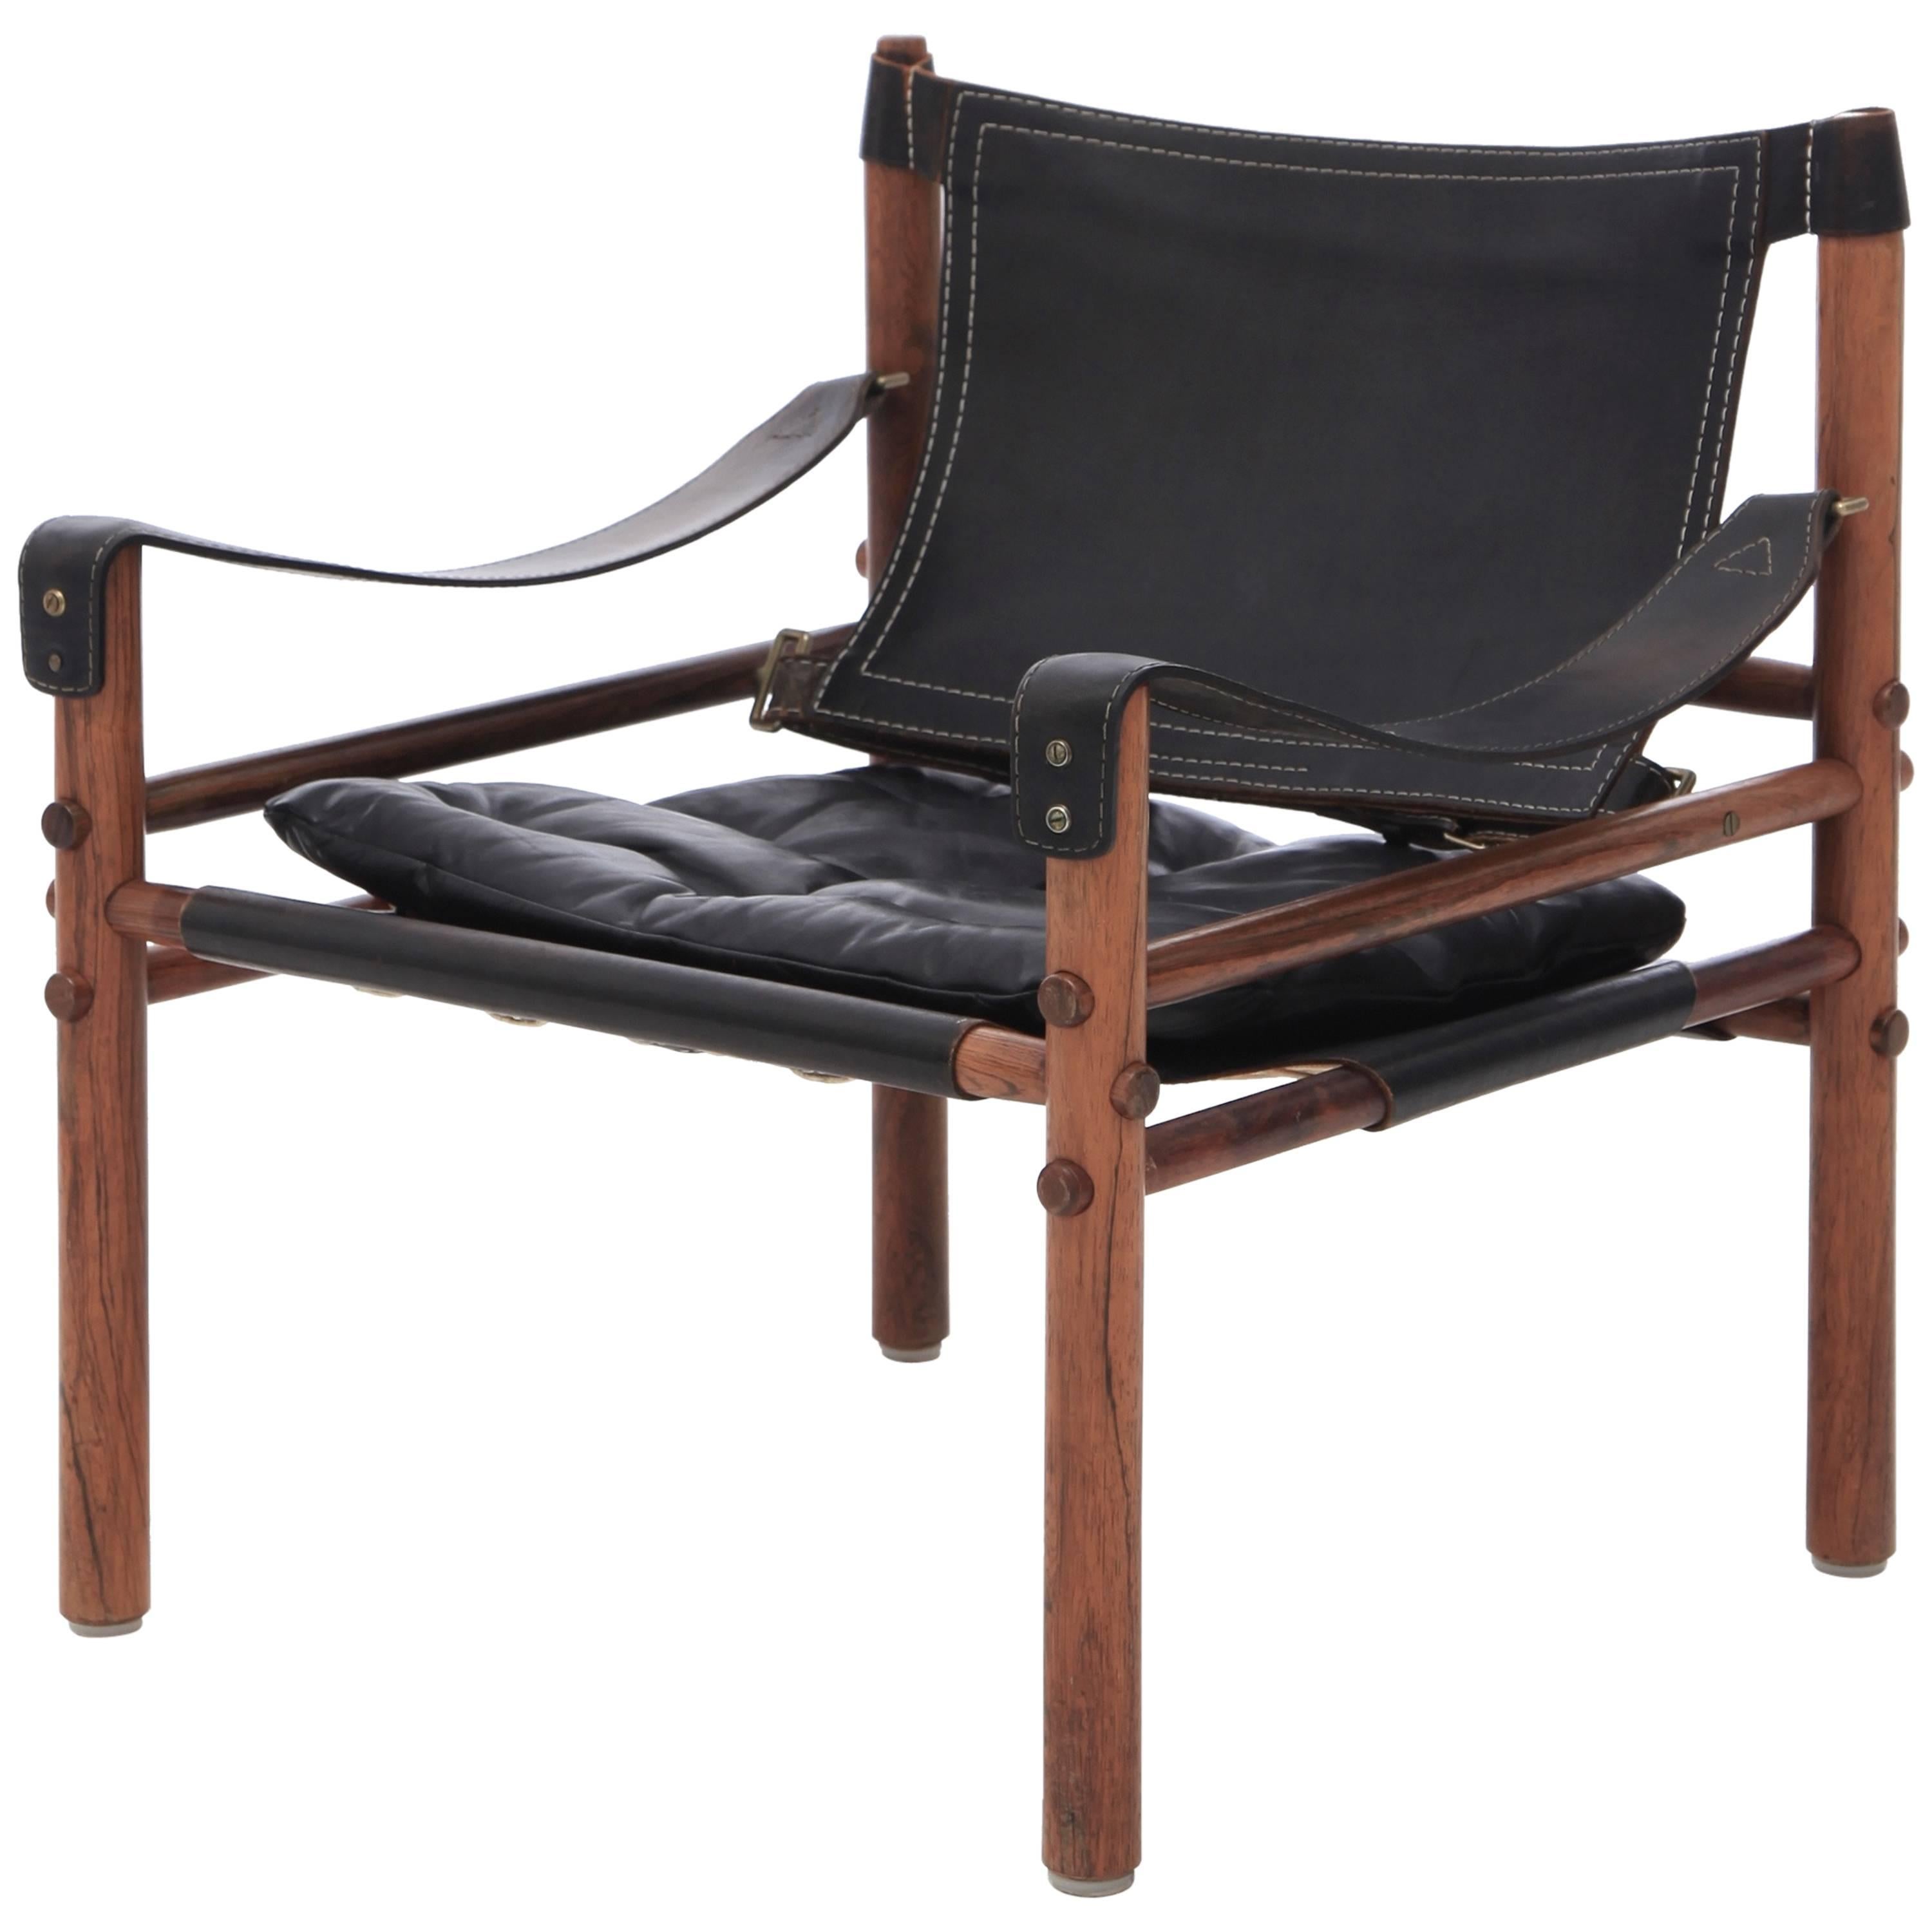 Arne Norell Black Leather and Rosewood Safari Sirocco Chair, Sweden, 1960s